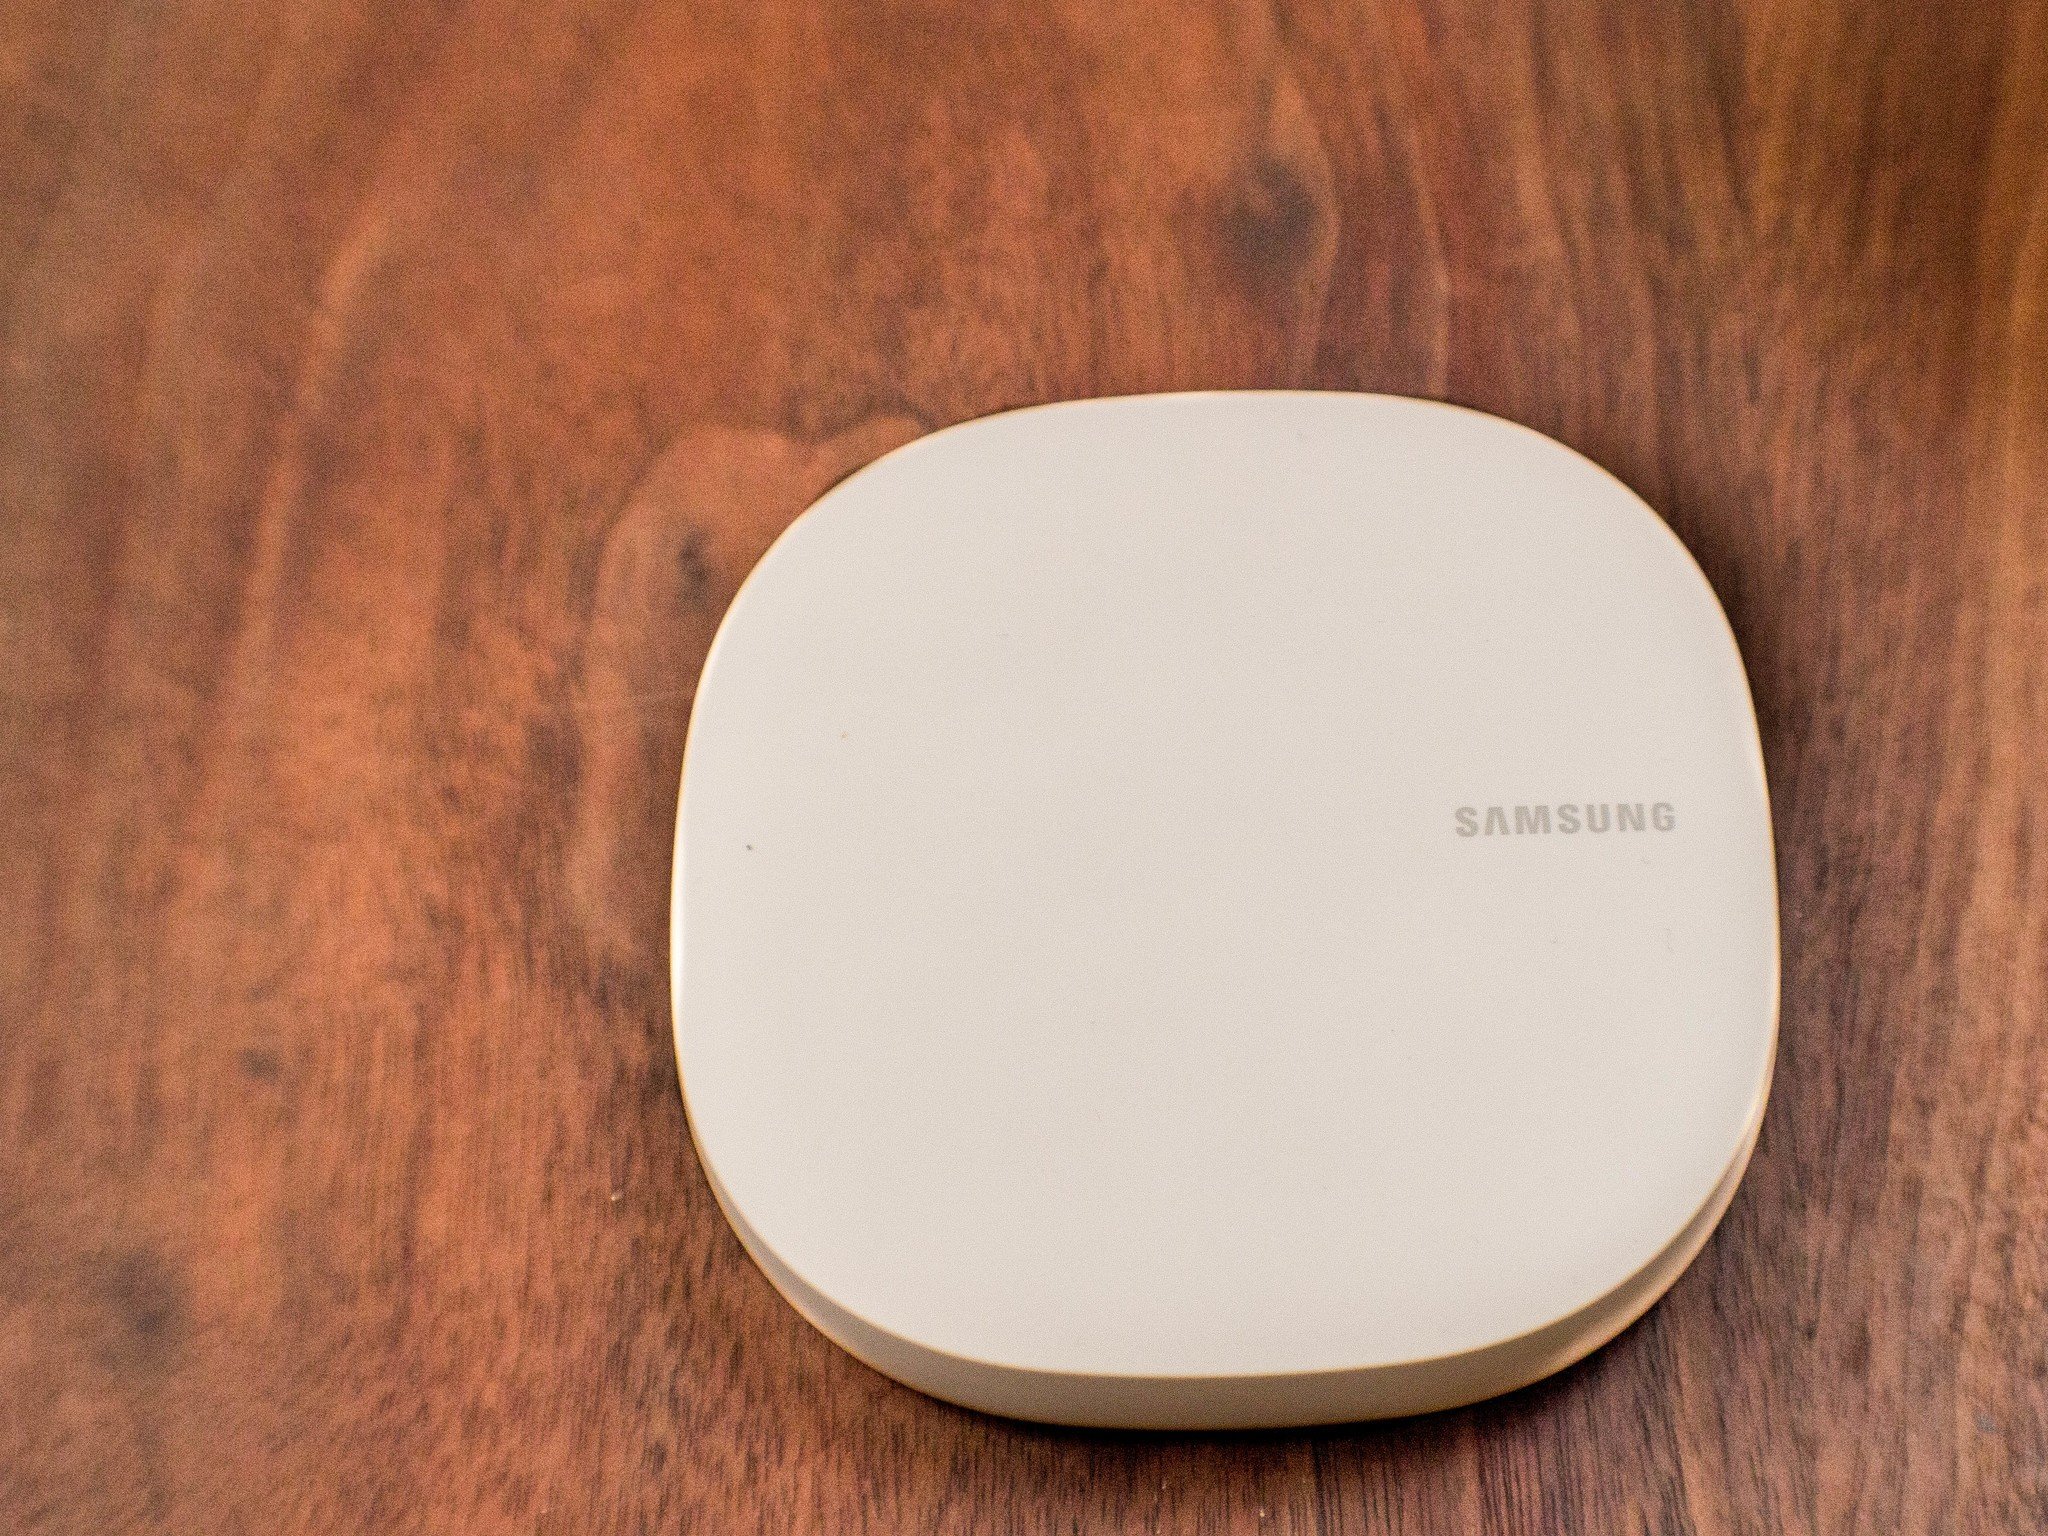 Samsung Connect Home Wi-Fi router